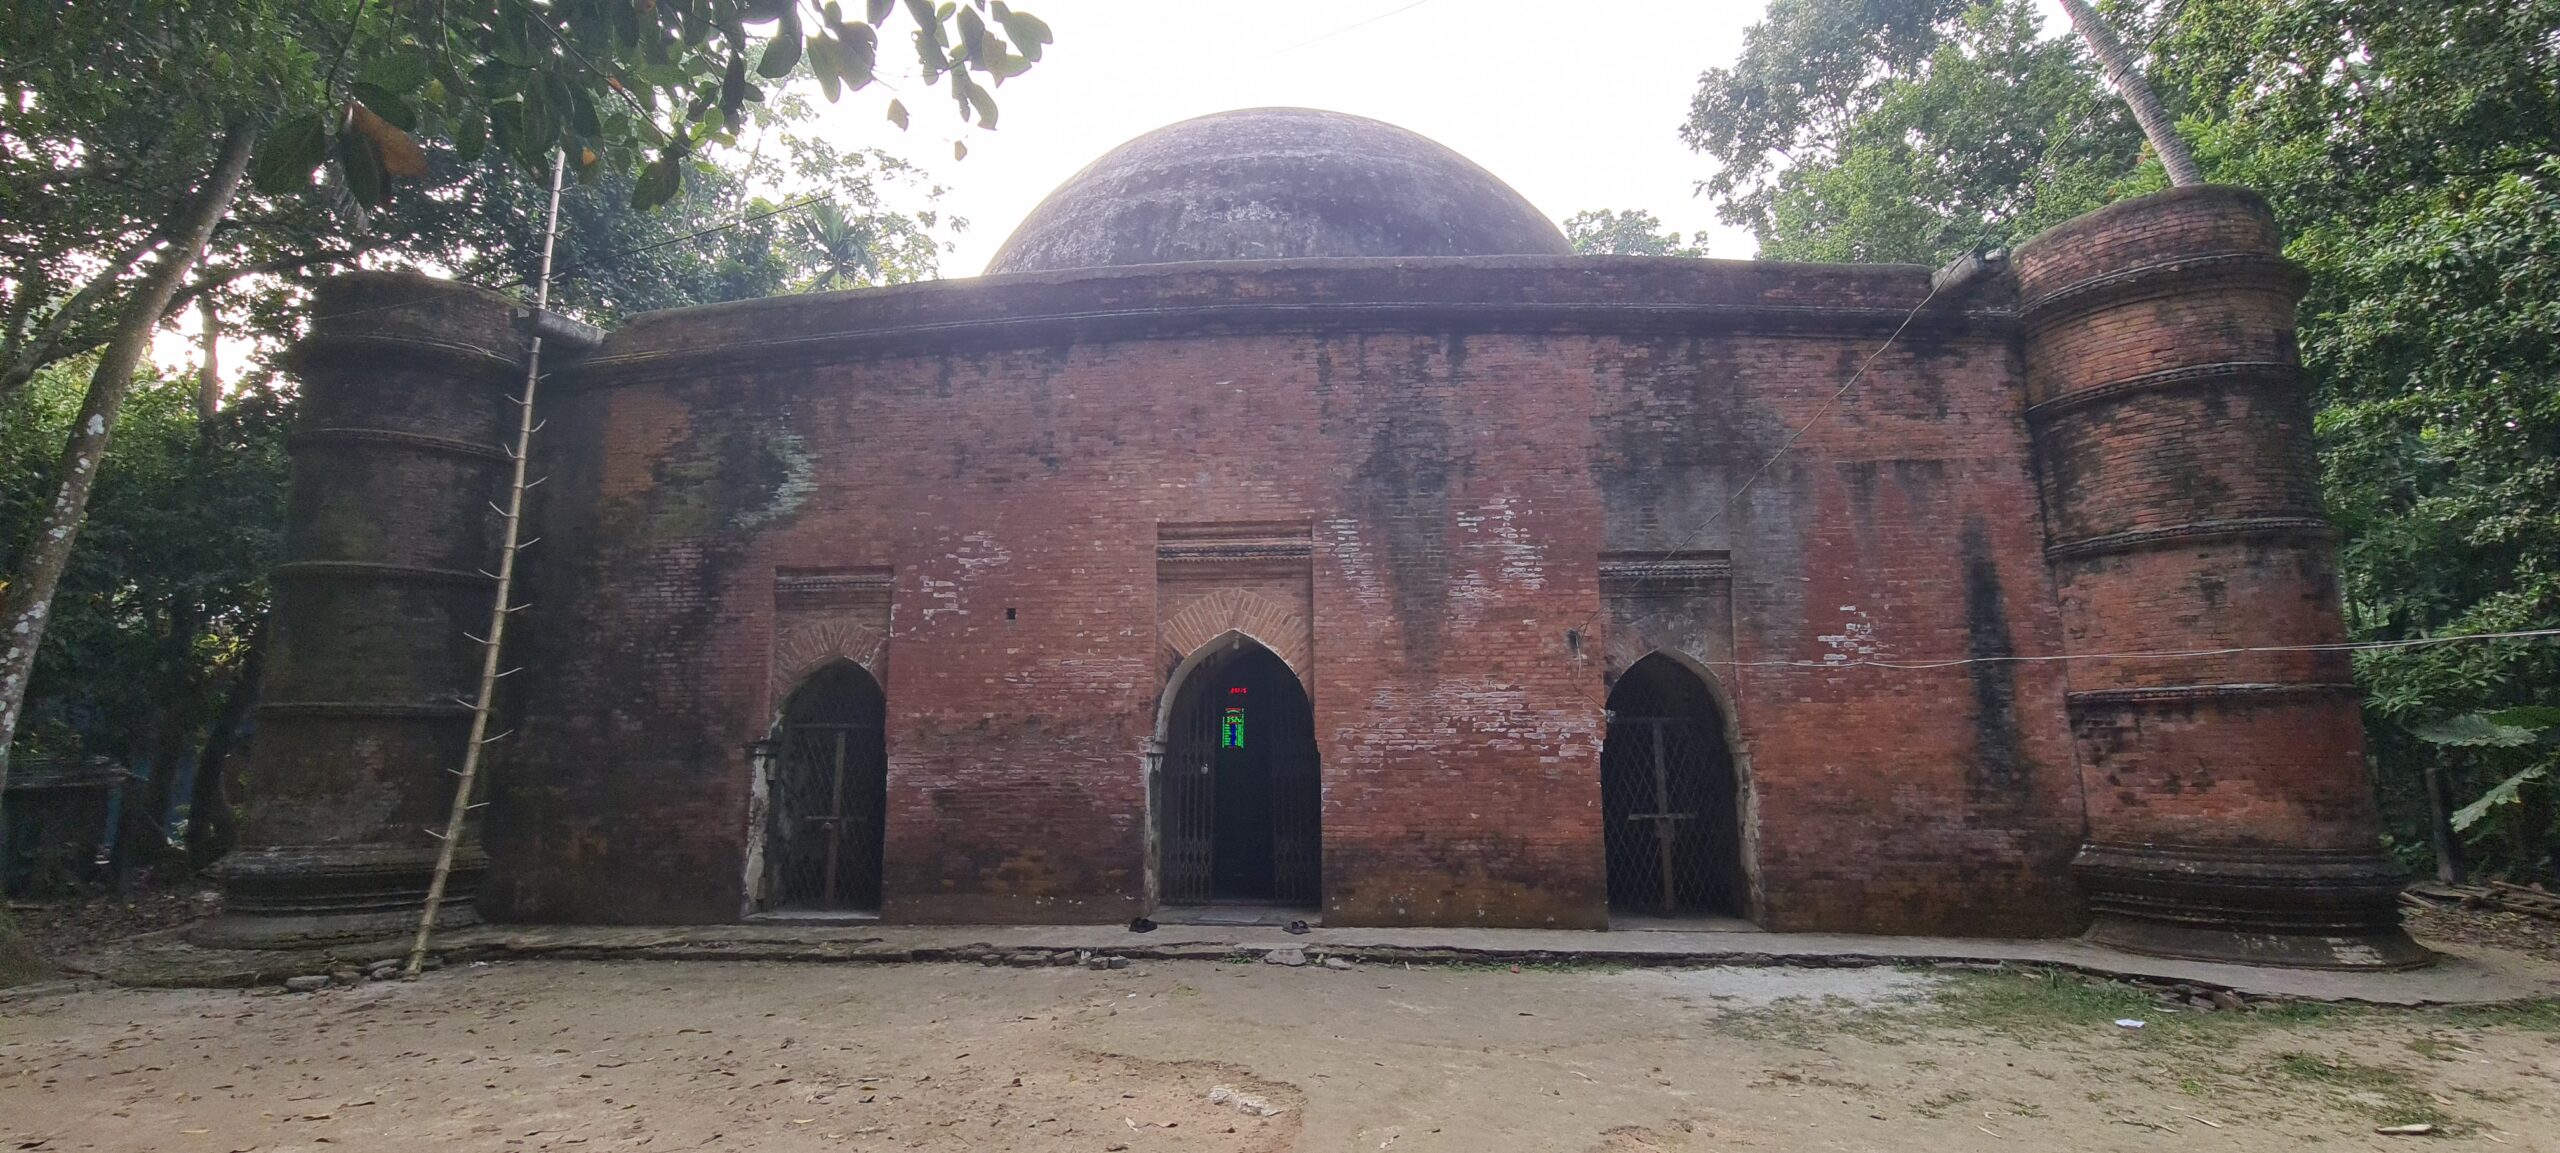 Biggest one dome mosque in Bangladesh